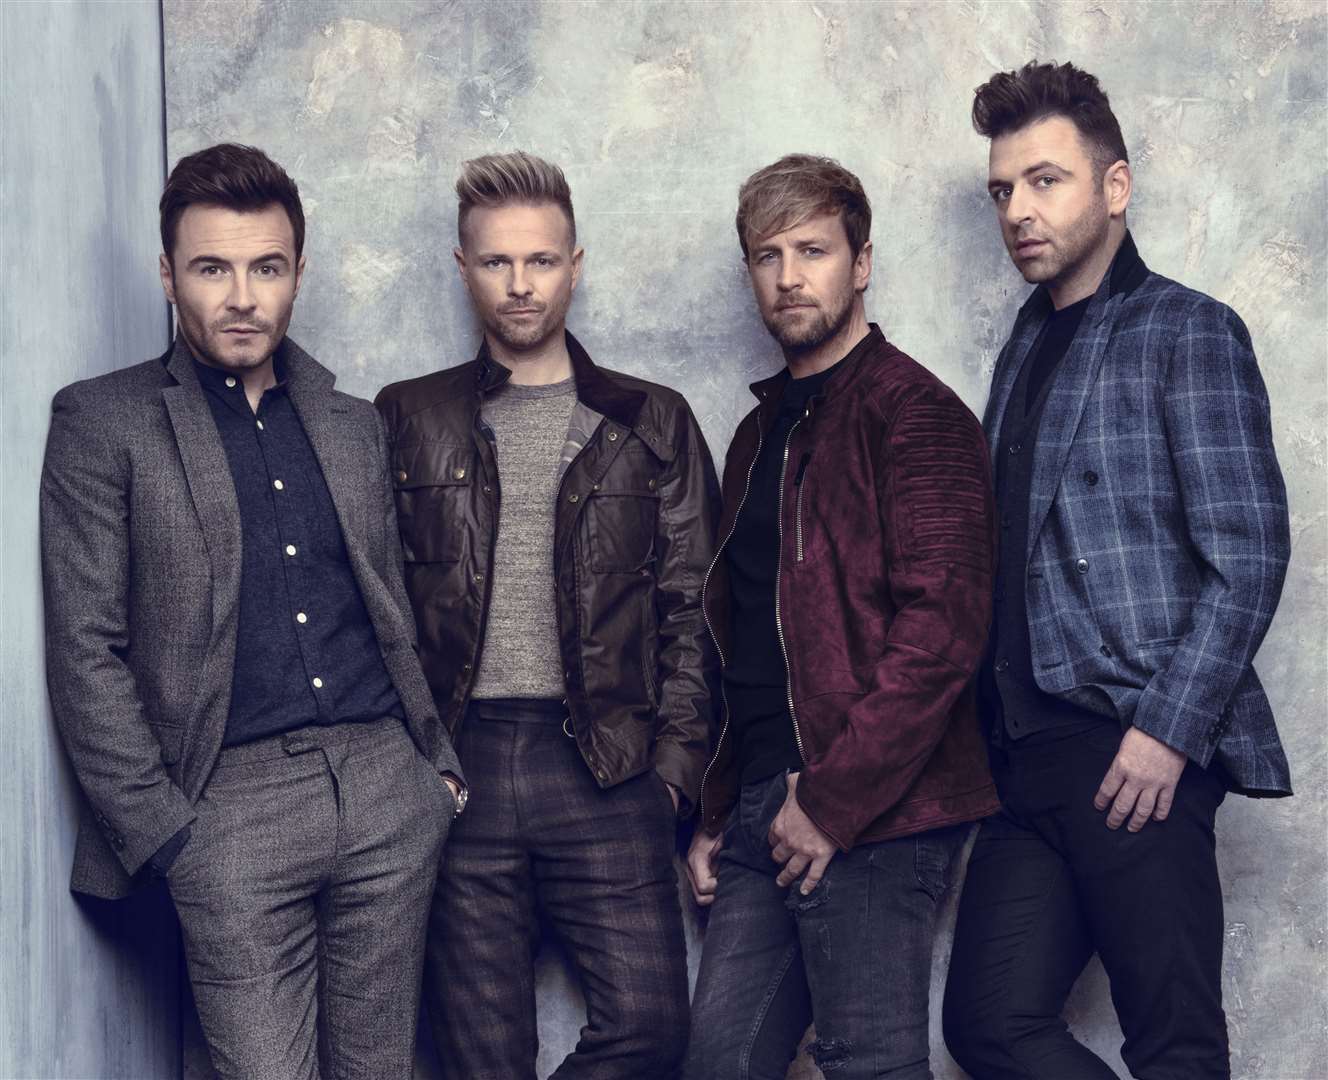 Westlife will tour next year following their successful Twenty Tour